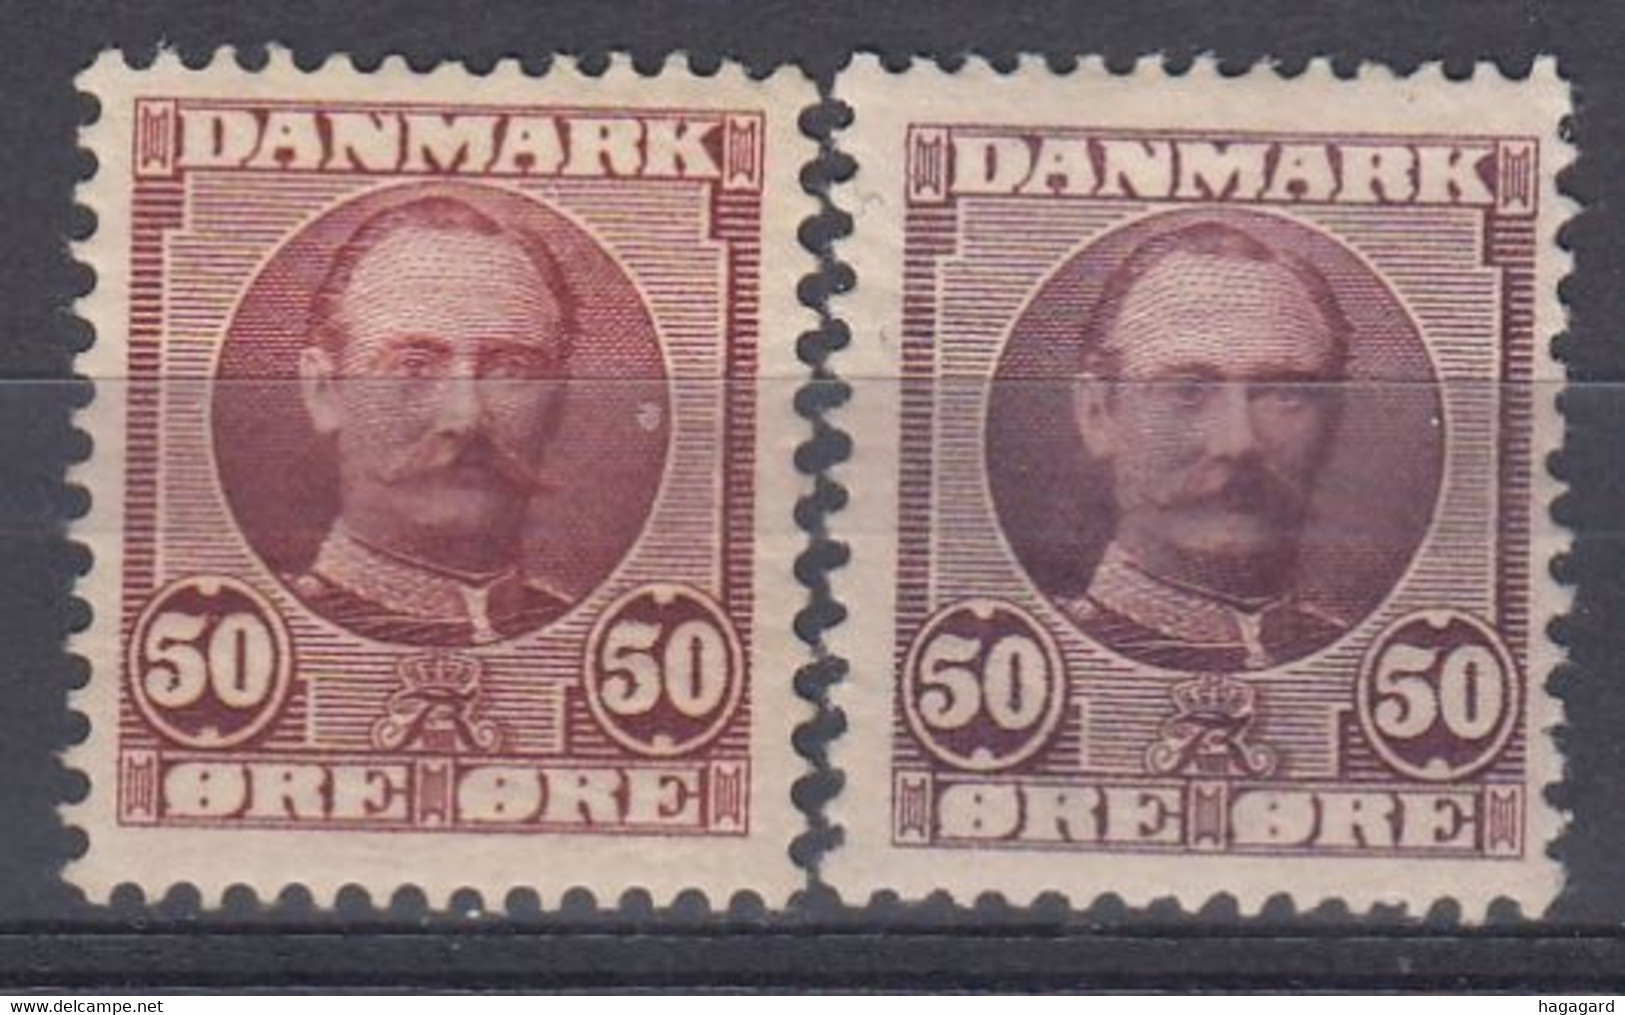 ++M1745. Denmark 1907. Michel 58 In 2 Shades. MH(*) Hinged - Nuovi